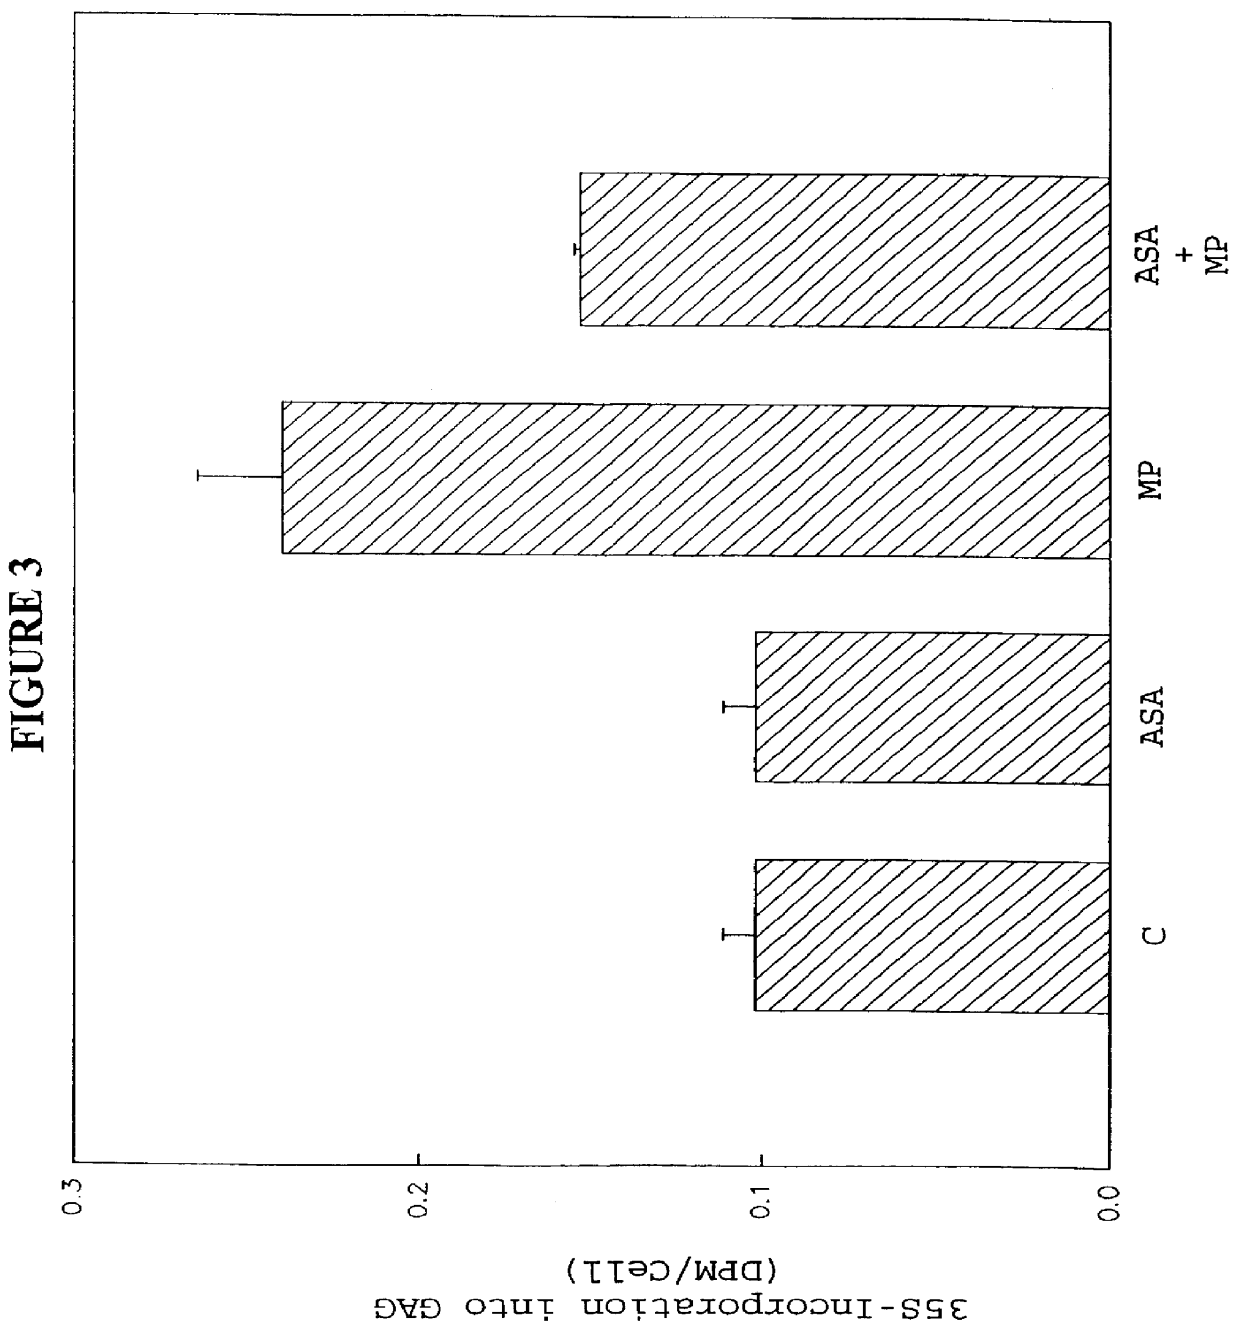 Method and pharmaceutical composition for chondrostimulation with a prostaglandin (e.g. misoprostol) and TGF- beta , optionally in combination with IGF-1